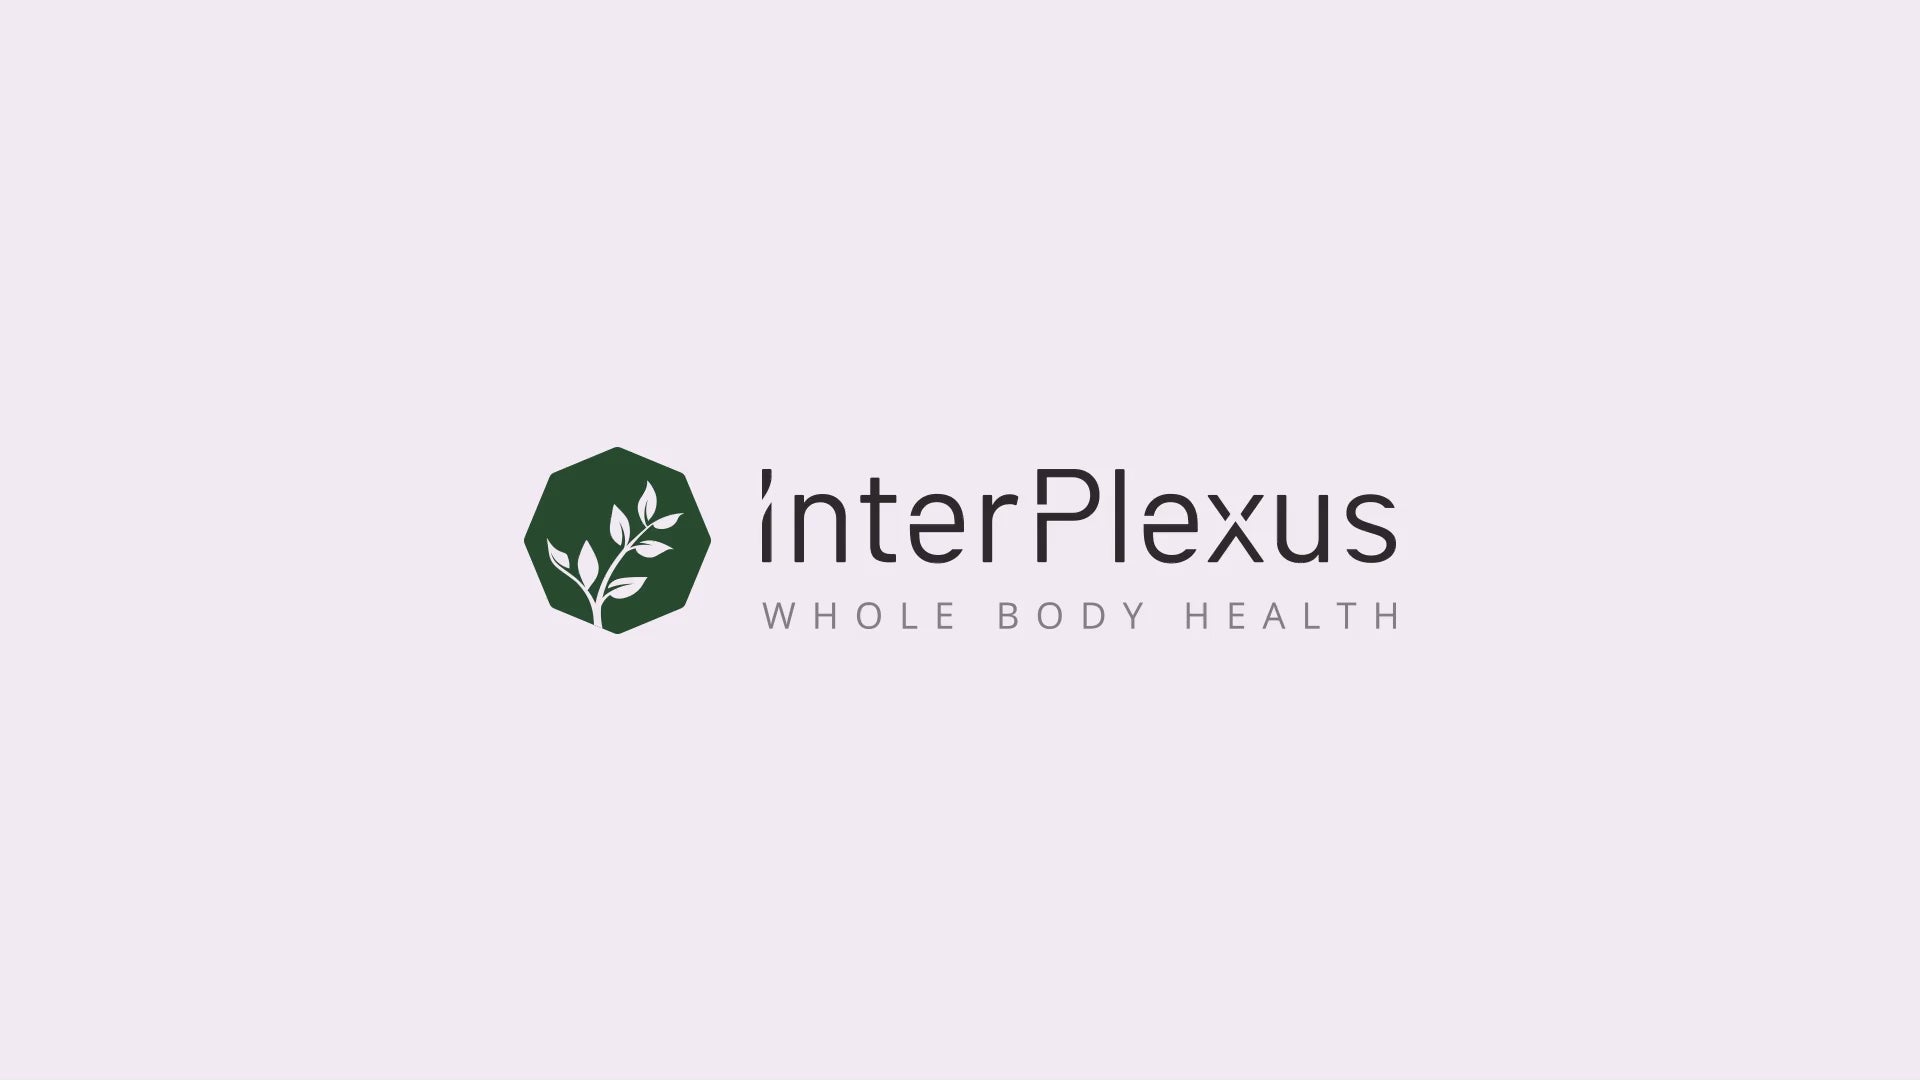 InterPlexus ProEnt2 Plus - Plant Extract Combination with Sweet Wormwood, Oregano & Rosemary for Gastrointestinal Support - Gluten Free, Dairy Free, Soy Free - 90 Capsules (45 Servings) Product Video